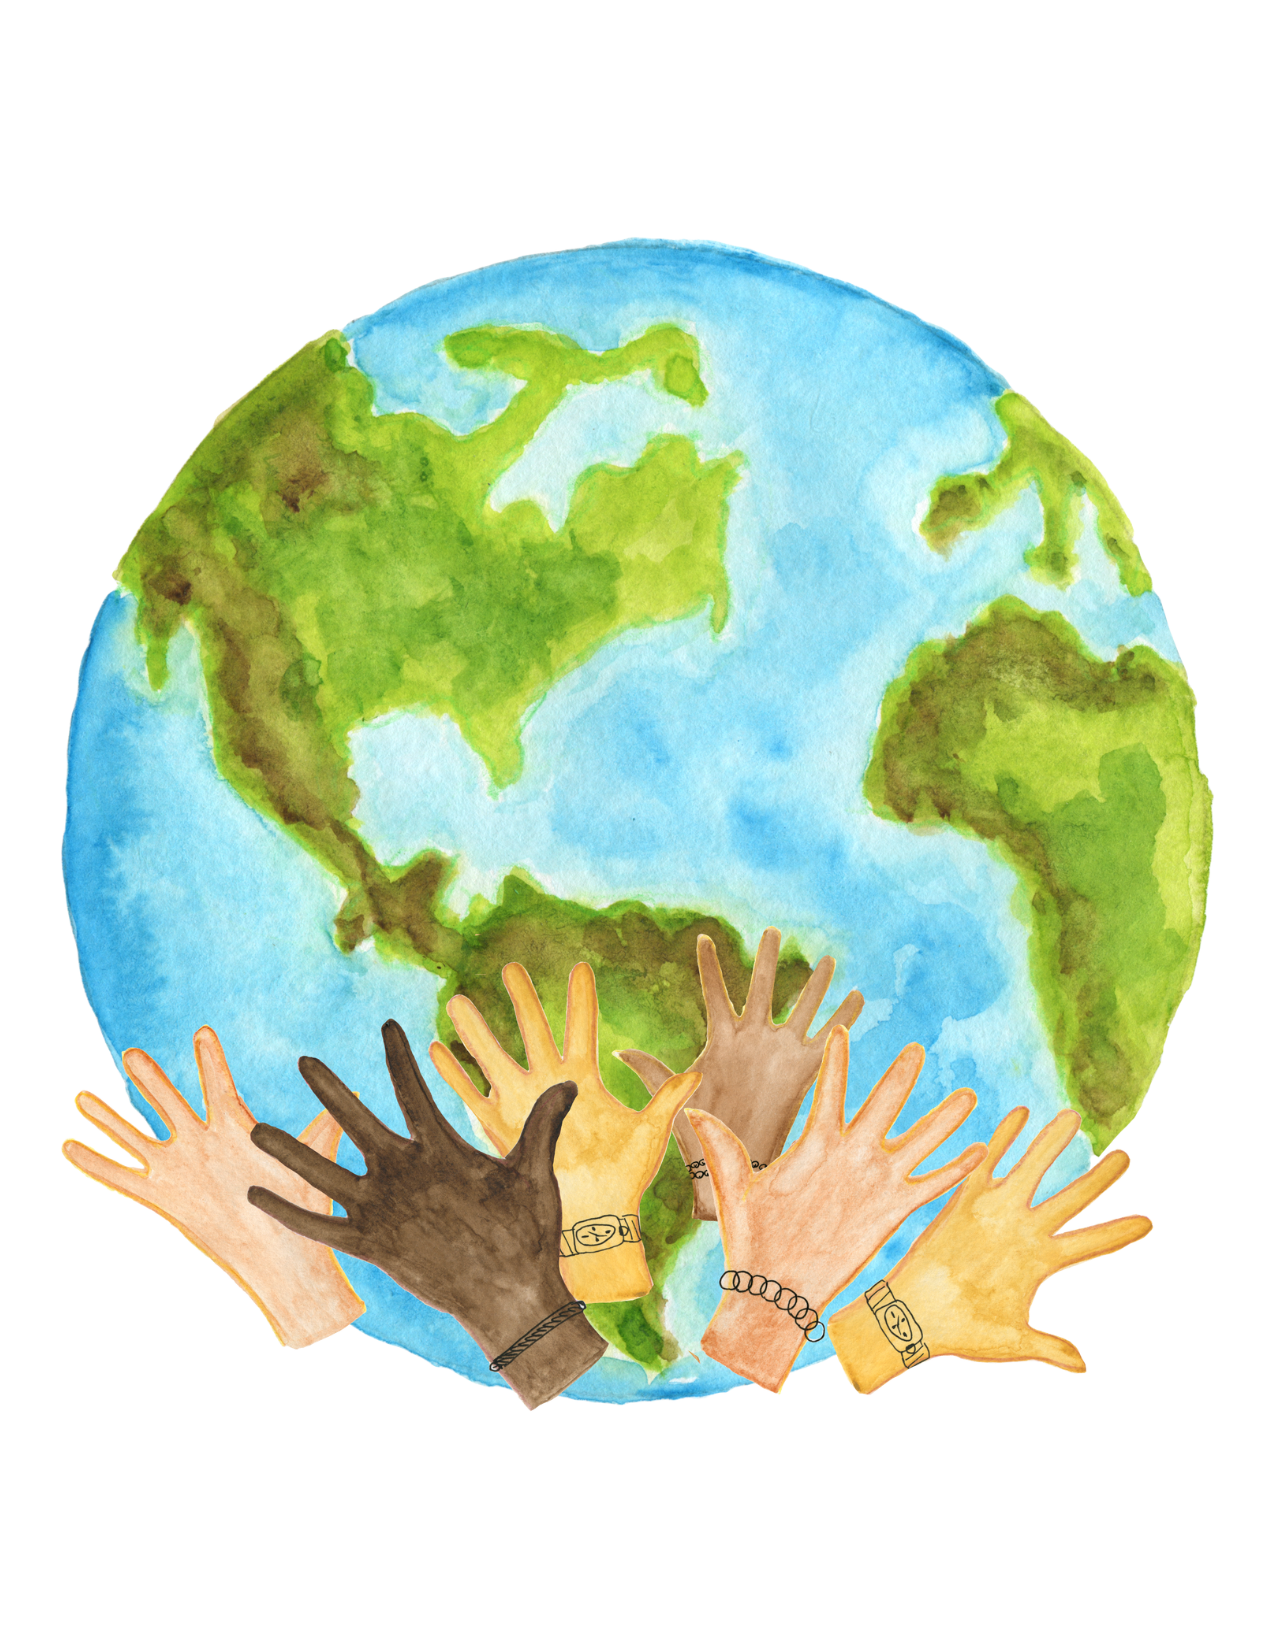 watercolor globe with blue water and green land masses and multi-ethnic hands. 